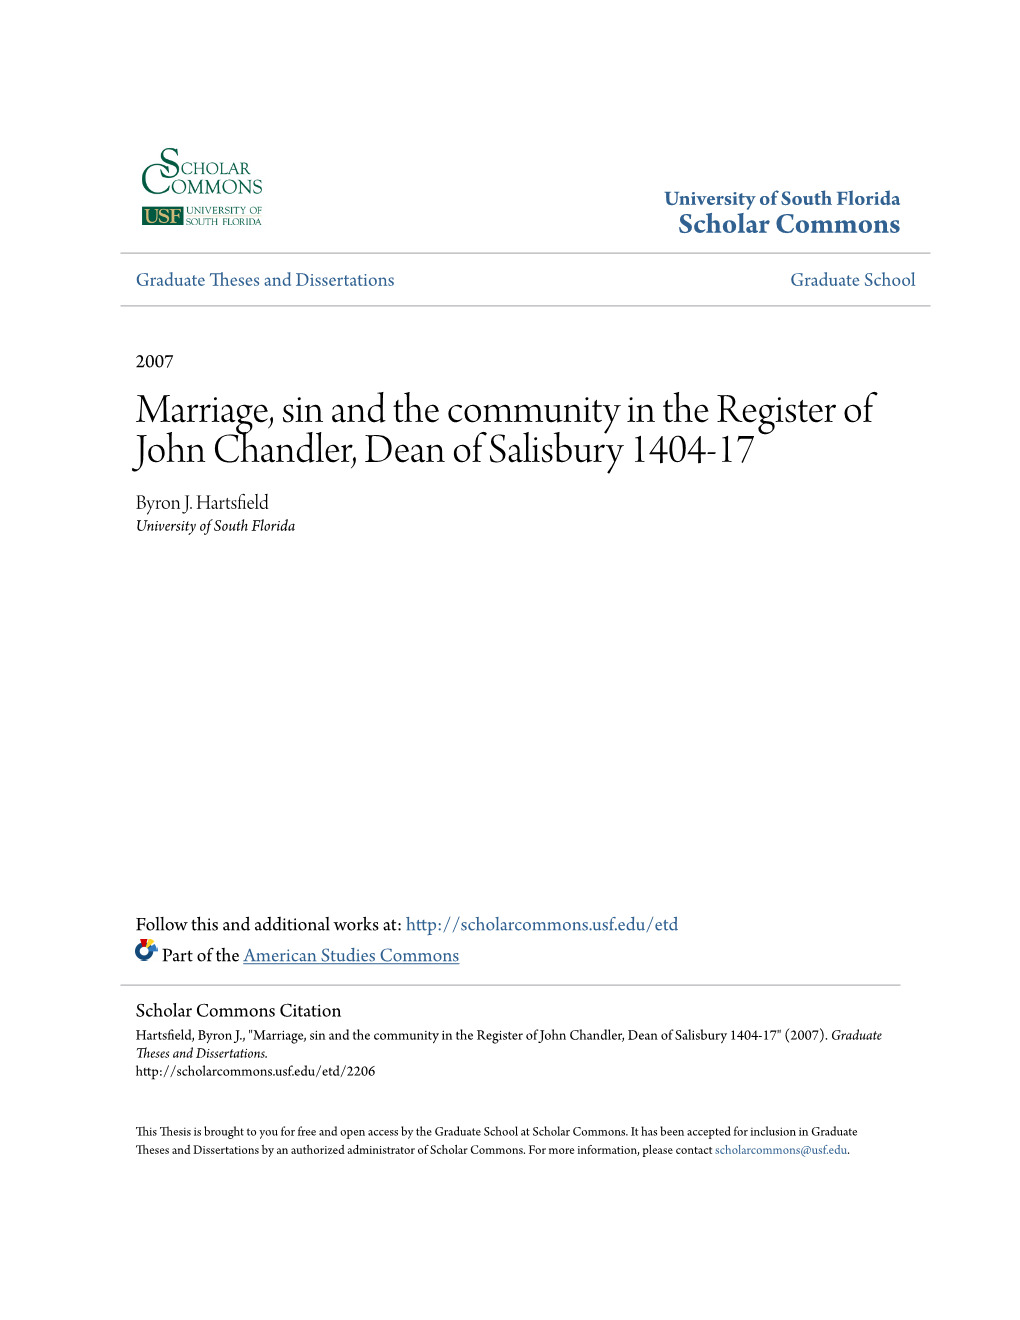 Marriage, Sin and the Community in the Register of John Chandler, Dean of Salisbury 1404-17 Byron J